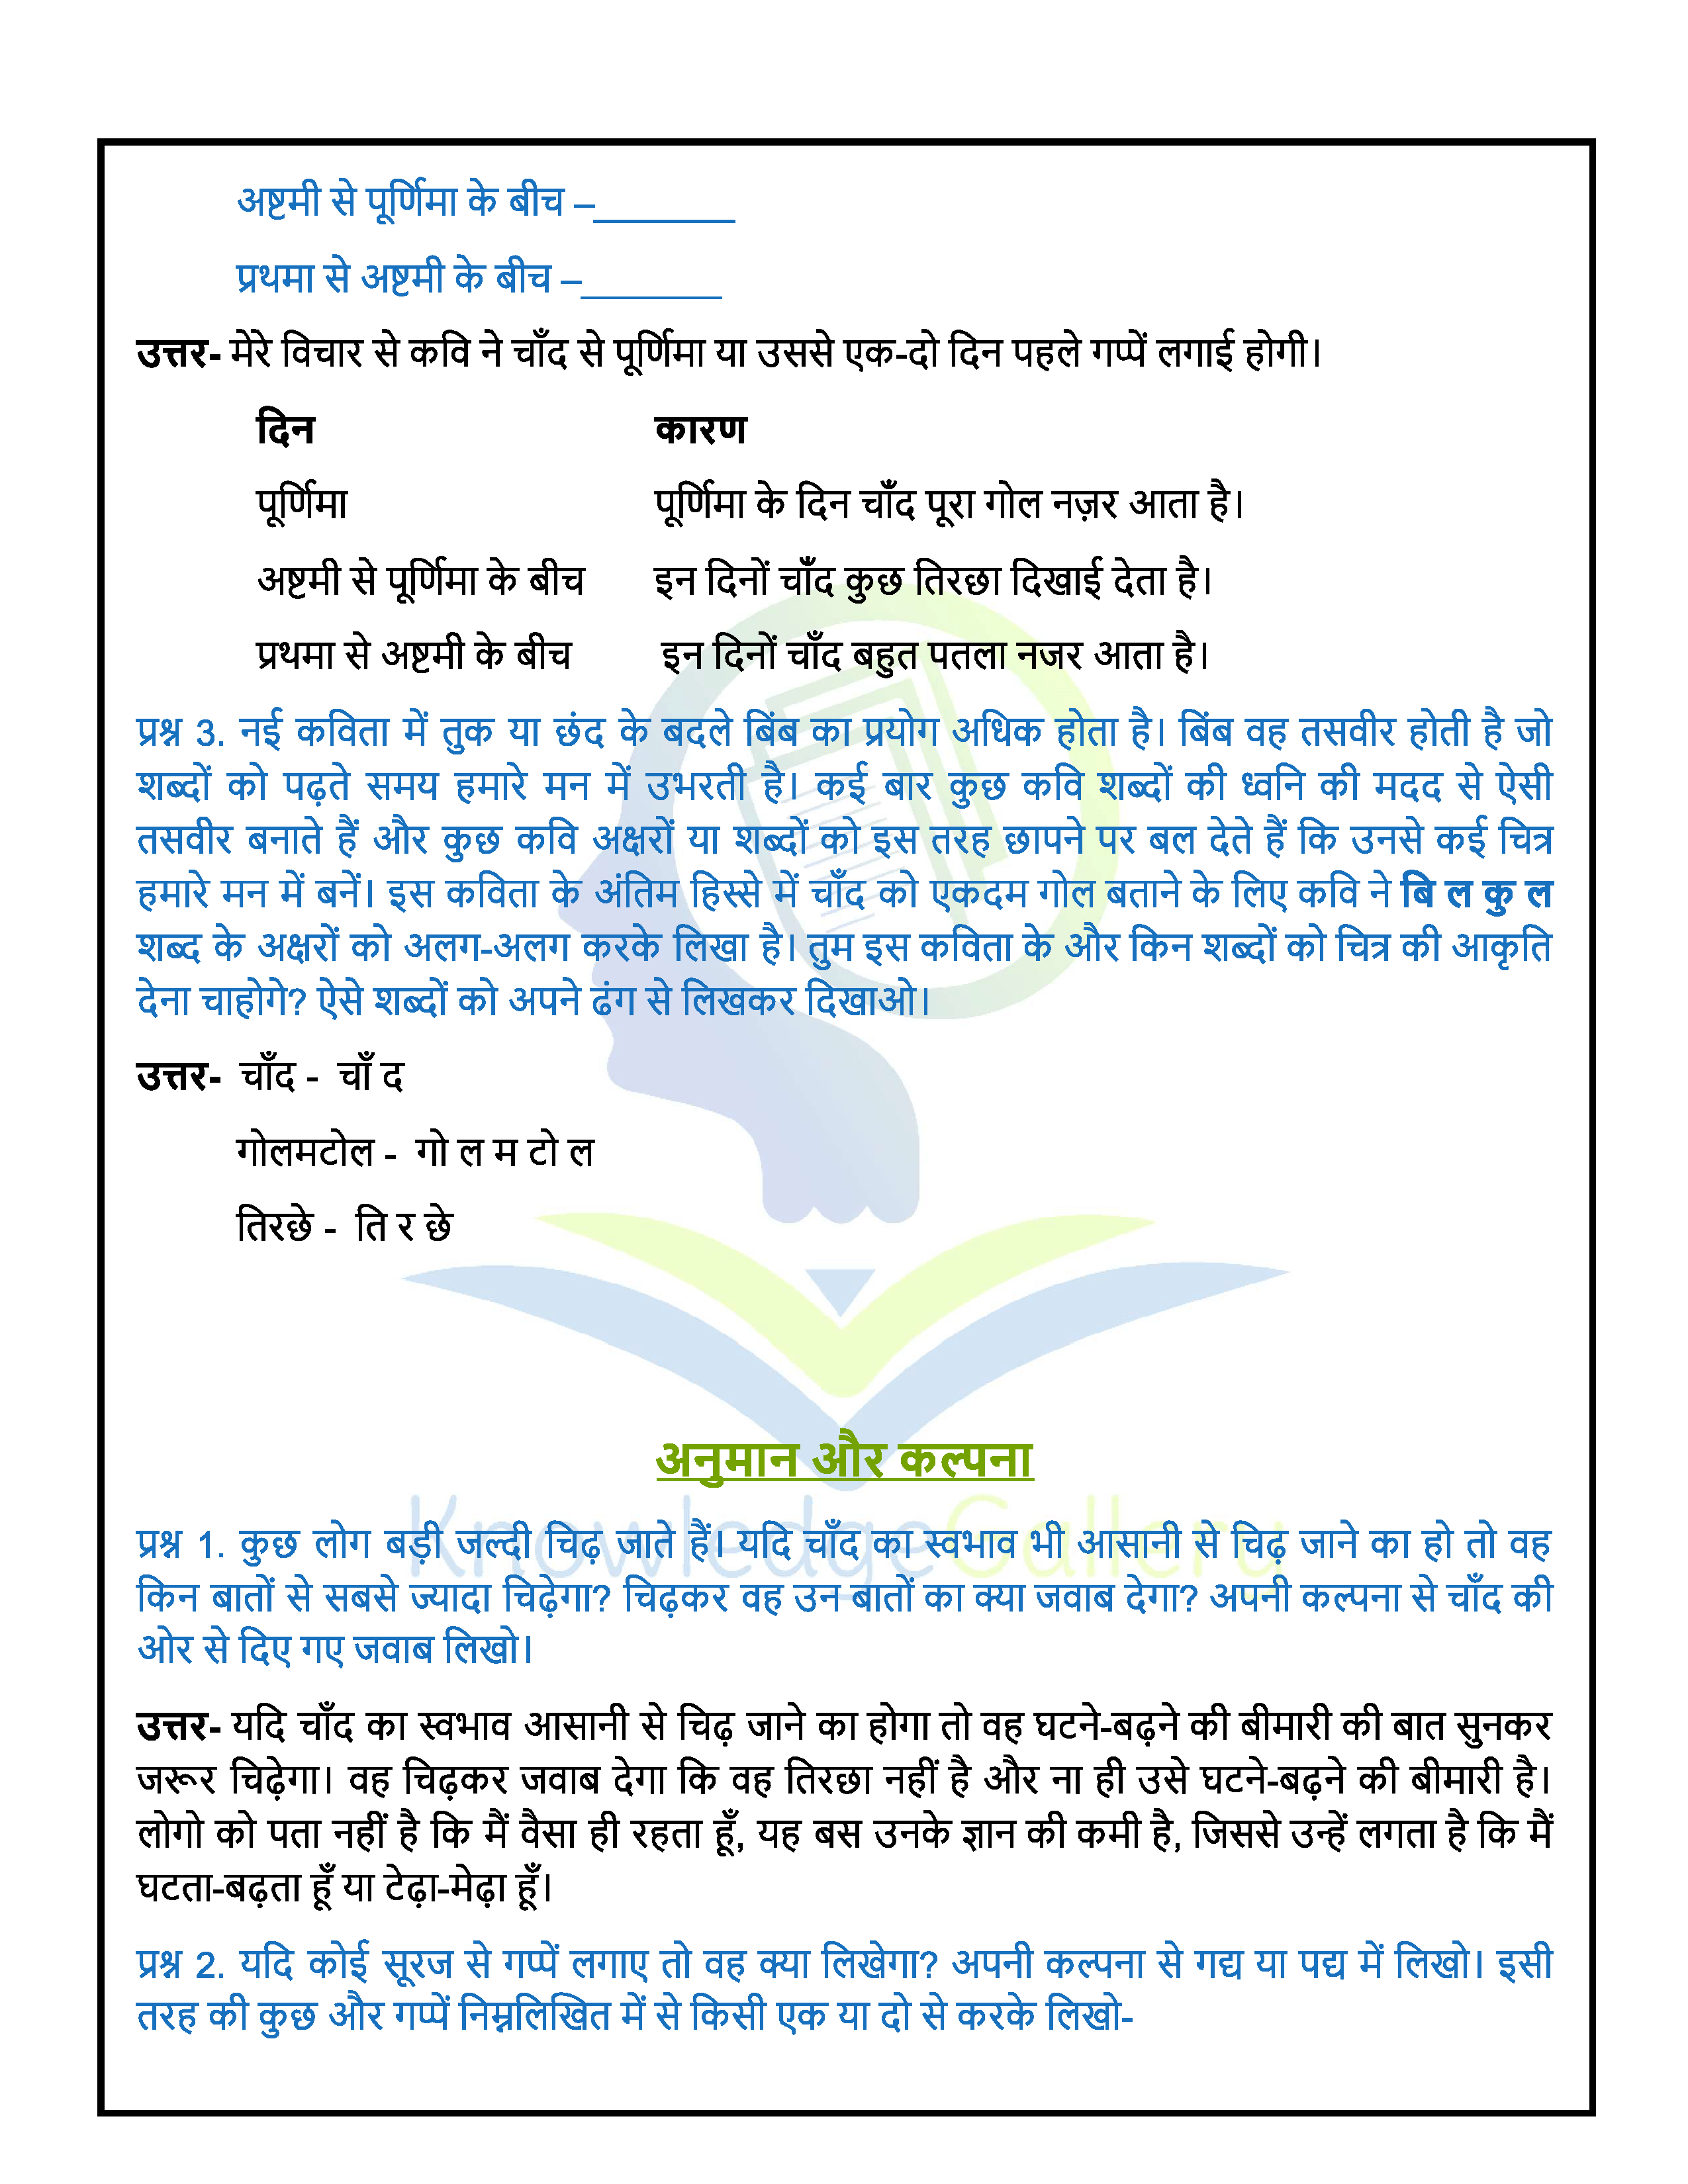 NCERT Solution For Class 6 Hindi Chapter 4 part 3